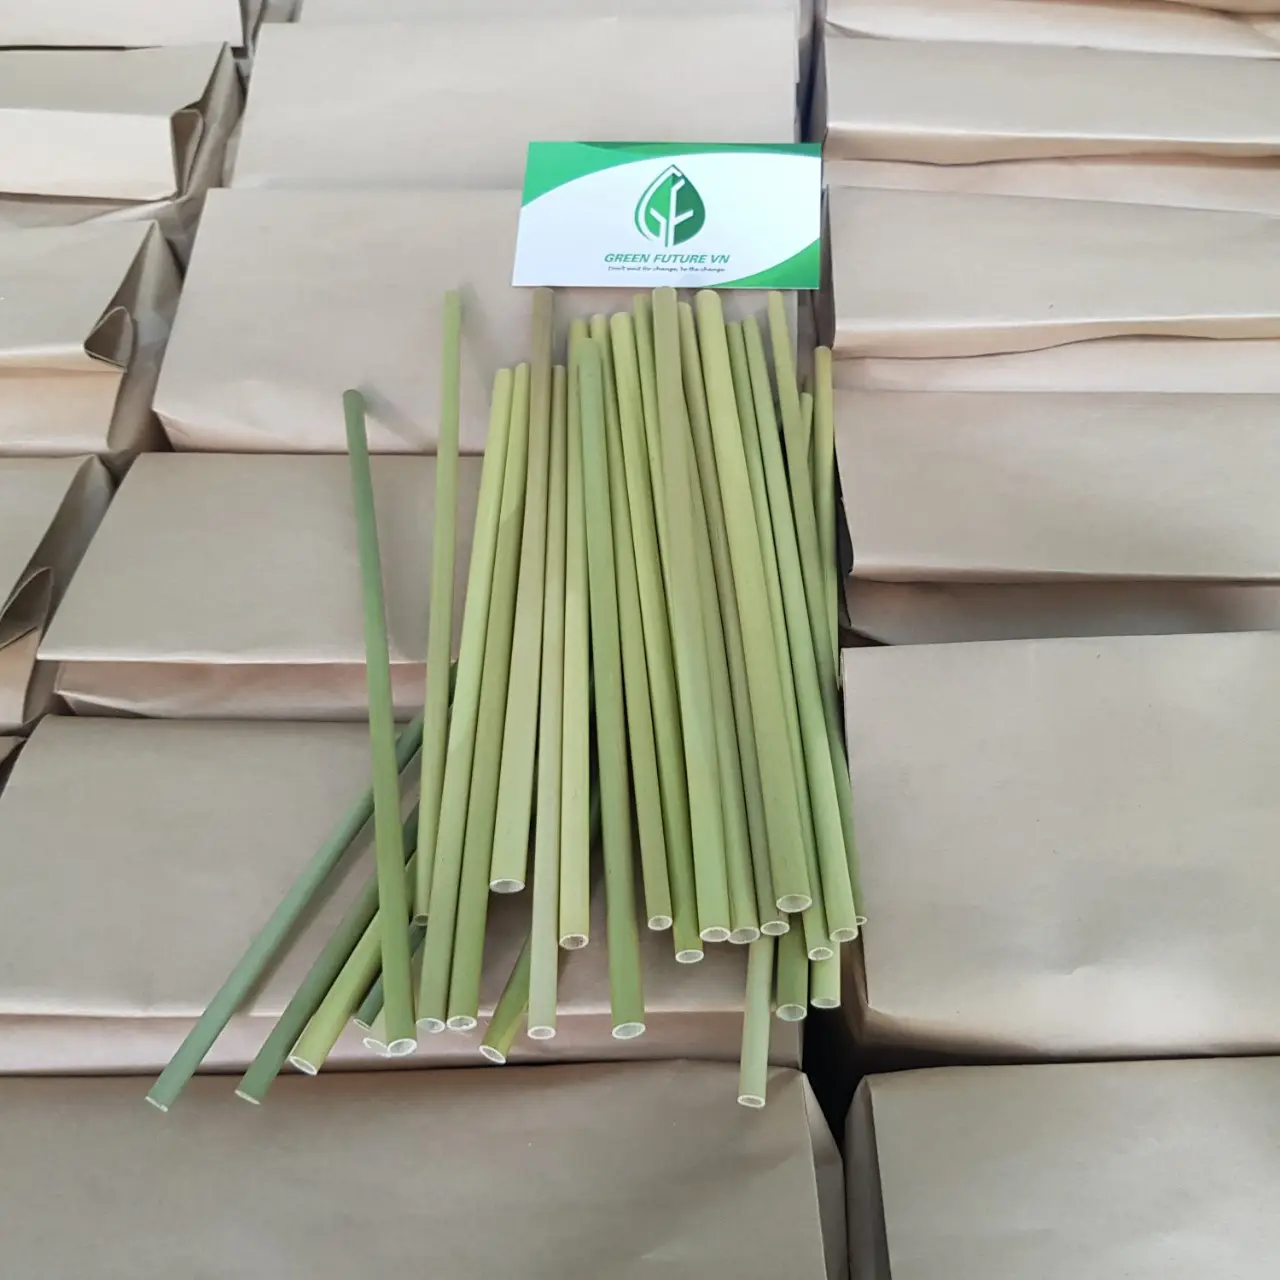 big Supply grass straws for Amazon seller from Viet Nam